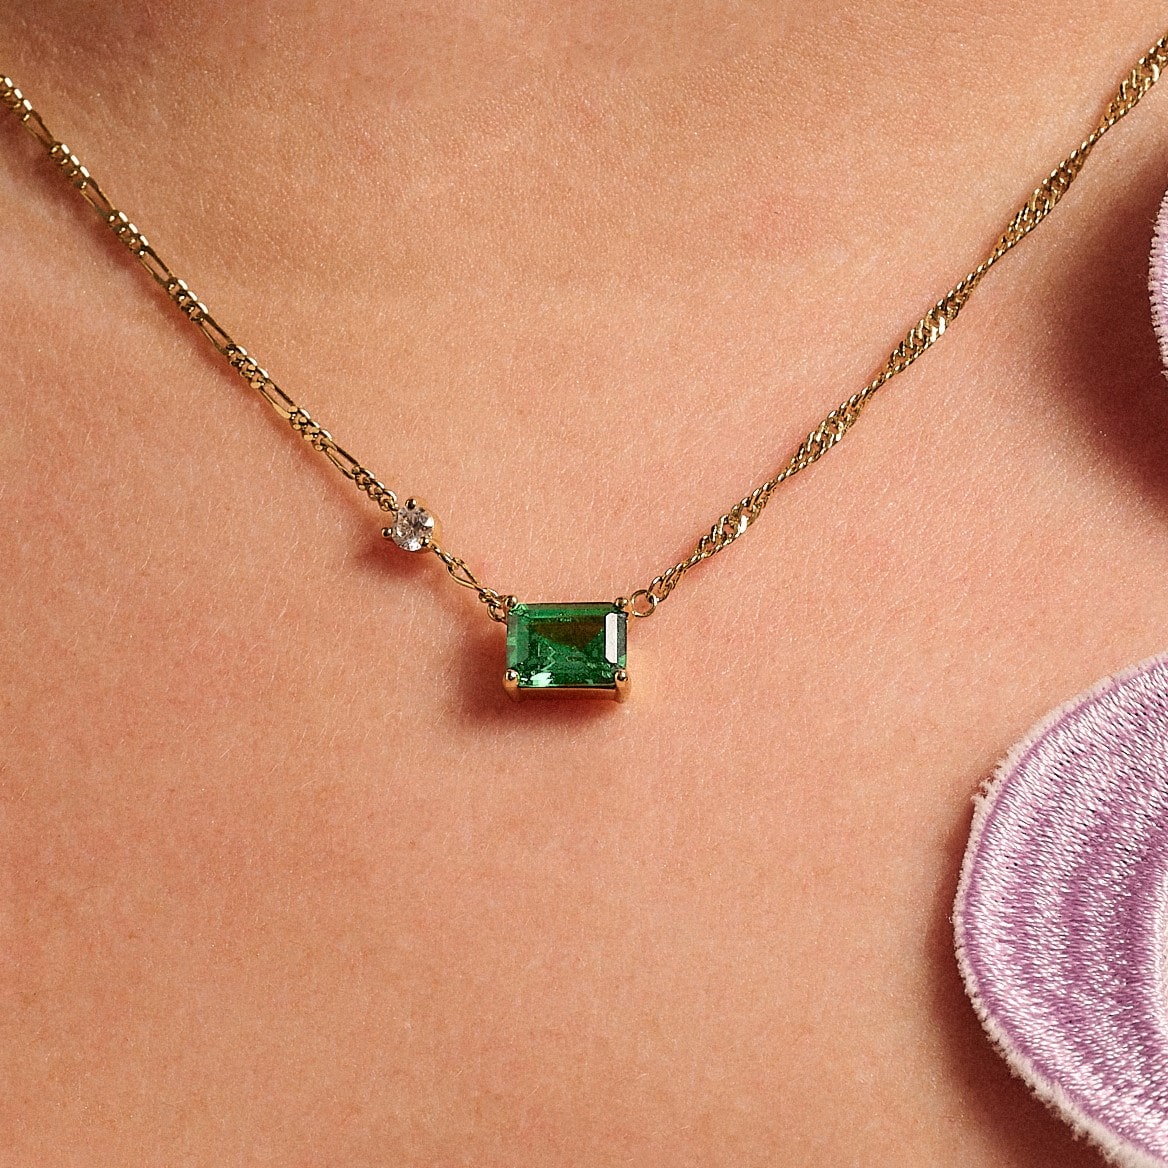 Amelia Scott Lola Emerald Cut Necklace with Green and Clear Zirconia